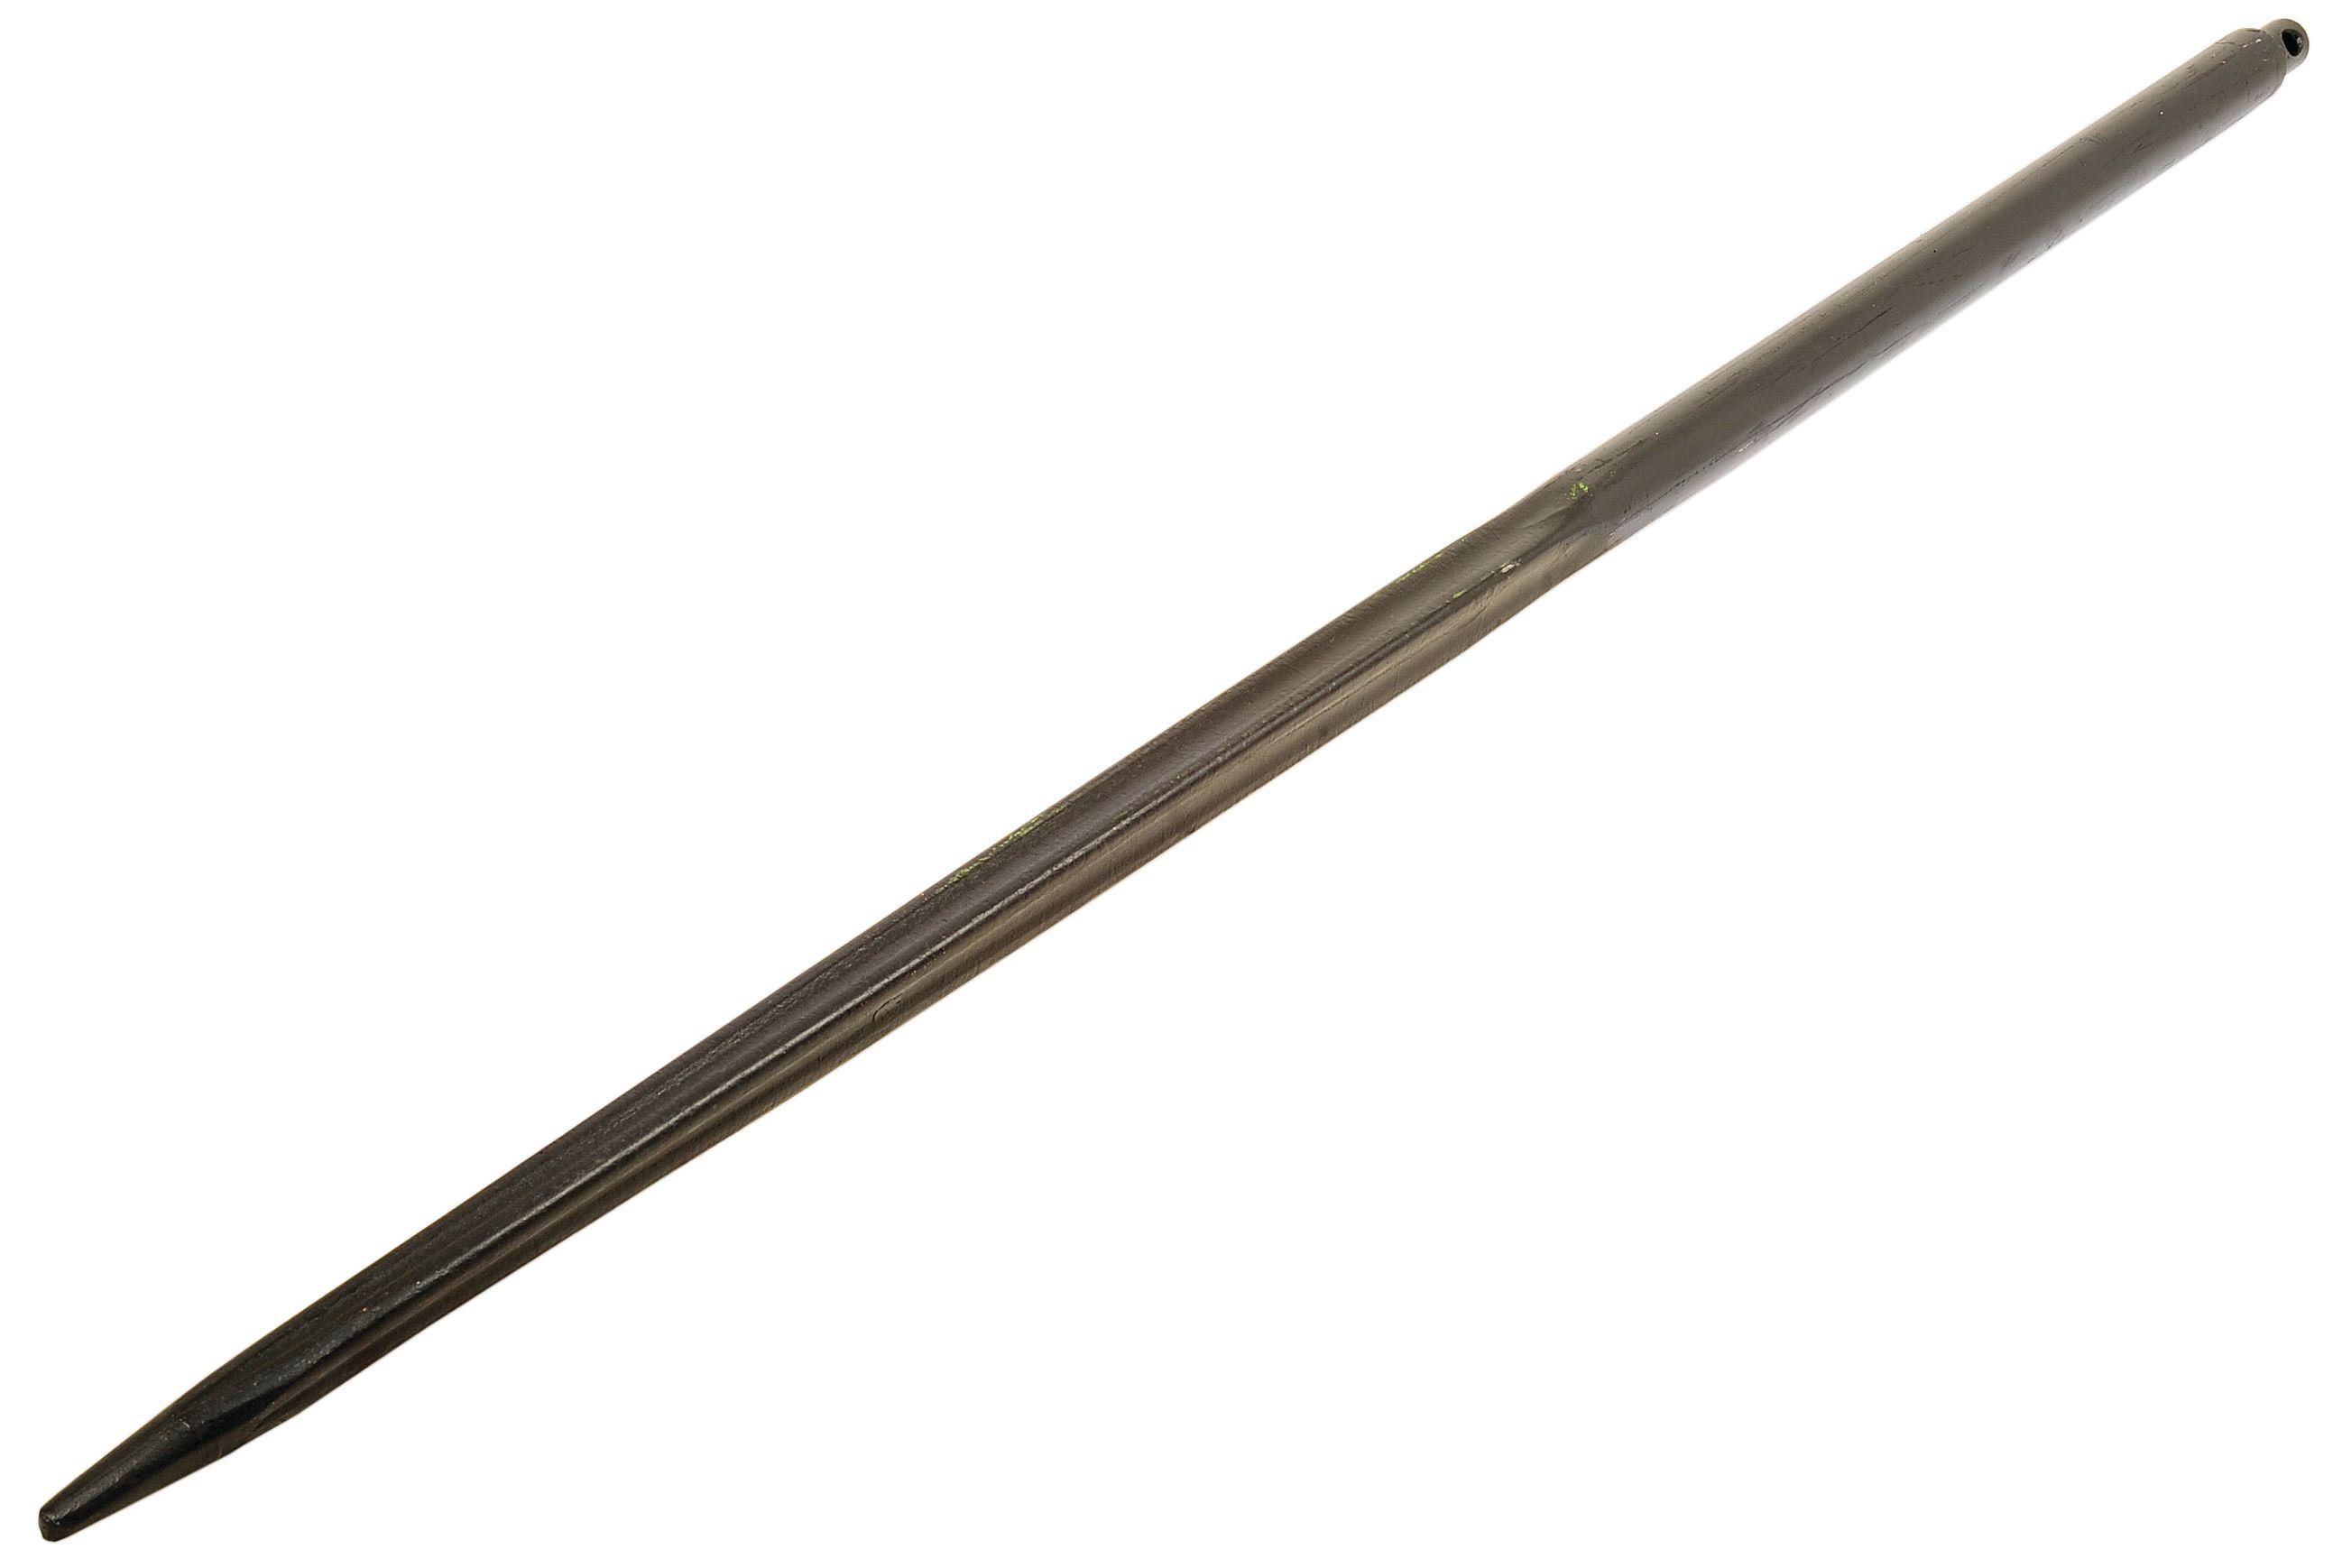 MAILLEUX TINE-STRAIGHT PIN FIT 1200MM 21509